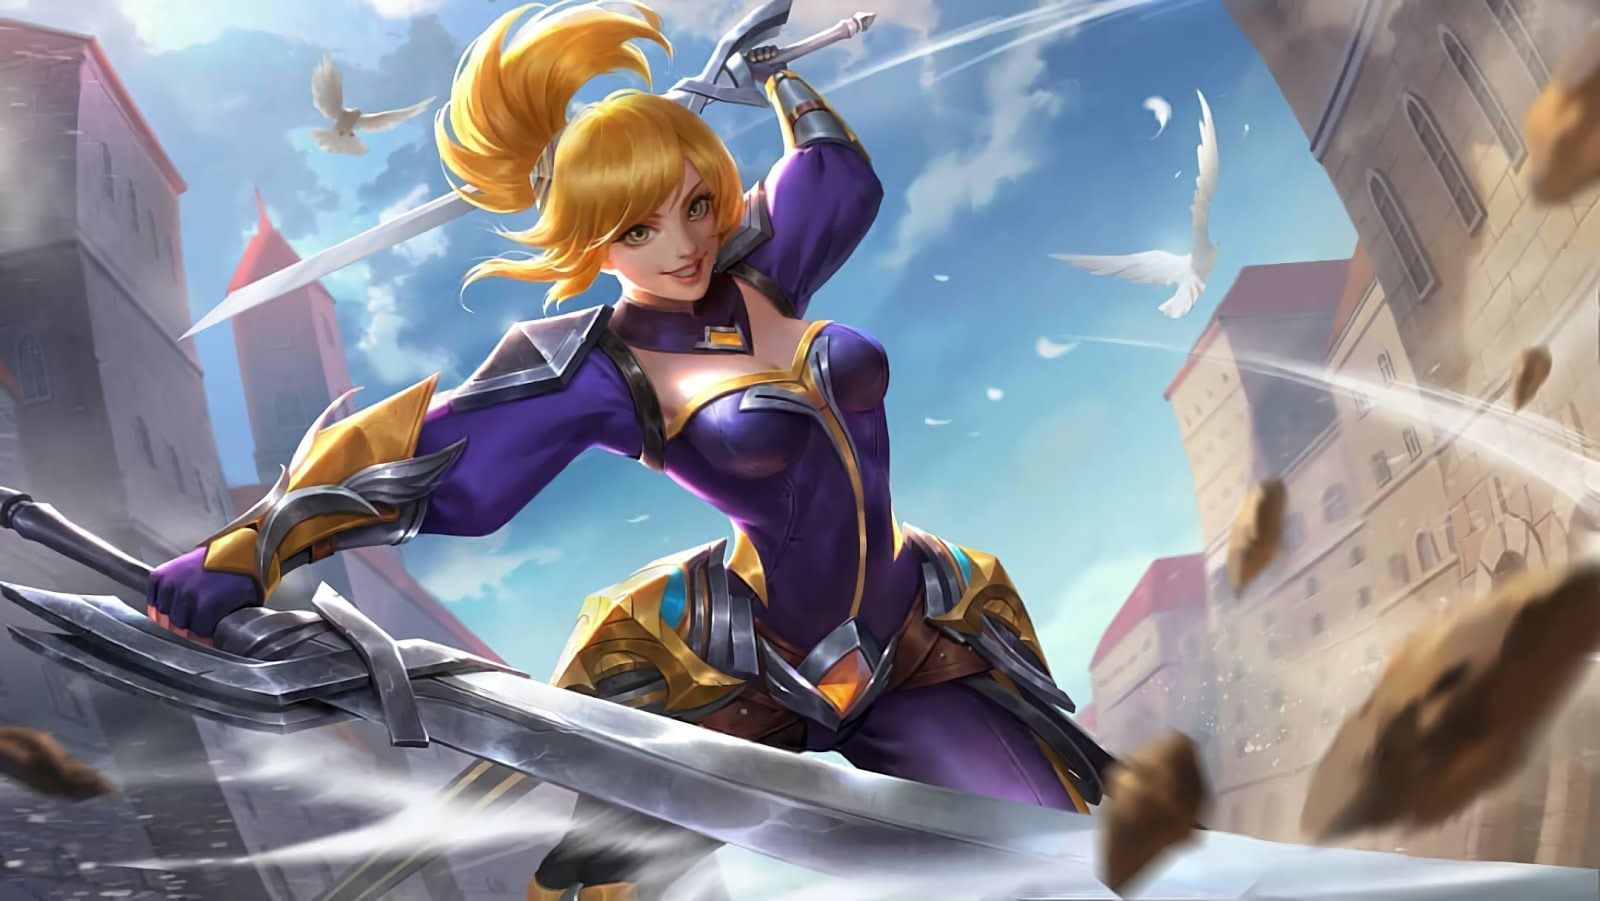 Mobile Legends Wallpapers HD: FANNY WALLPAPERS FULL HD